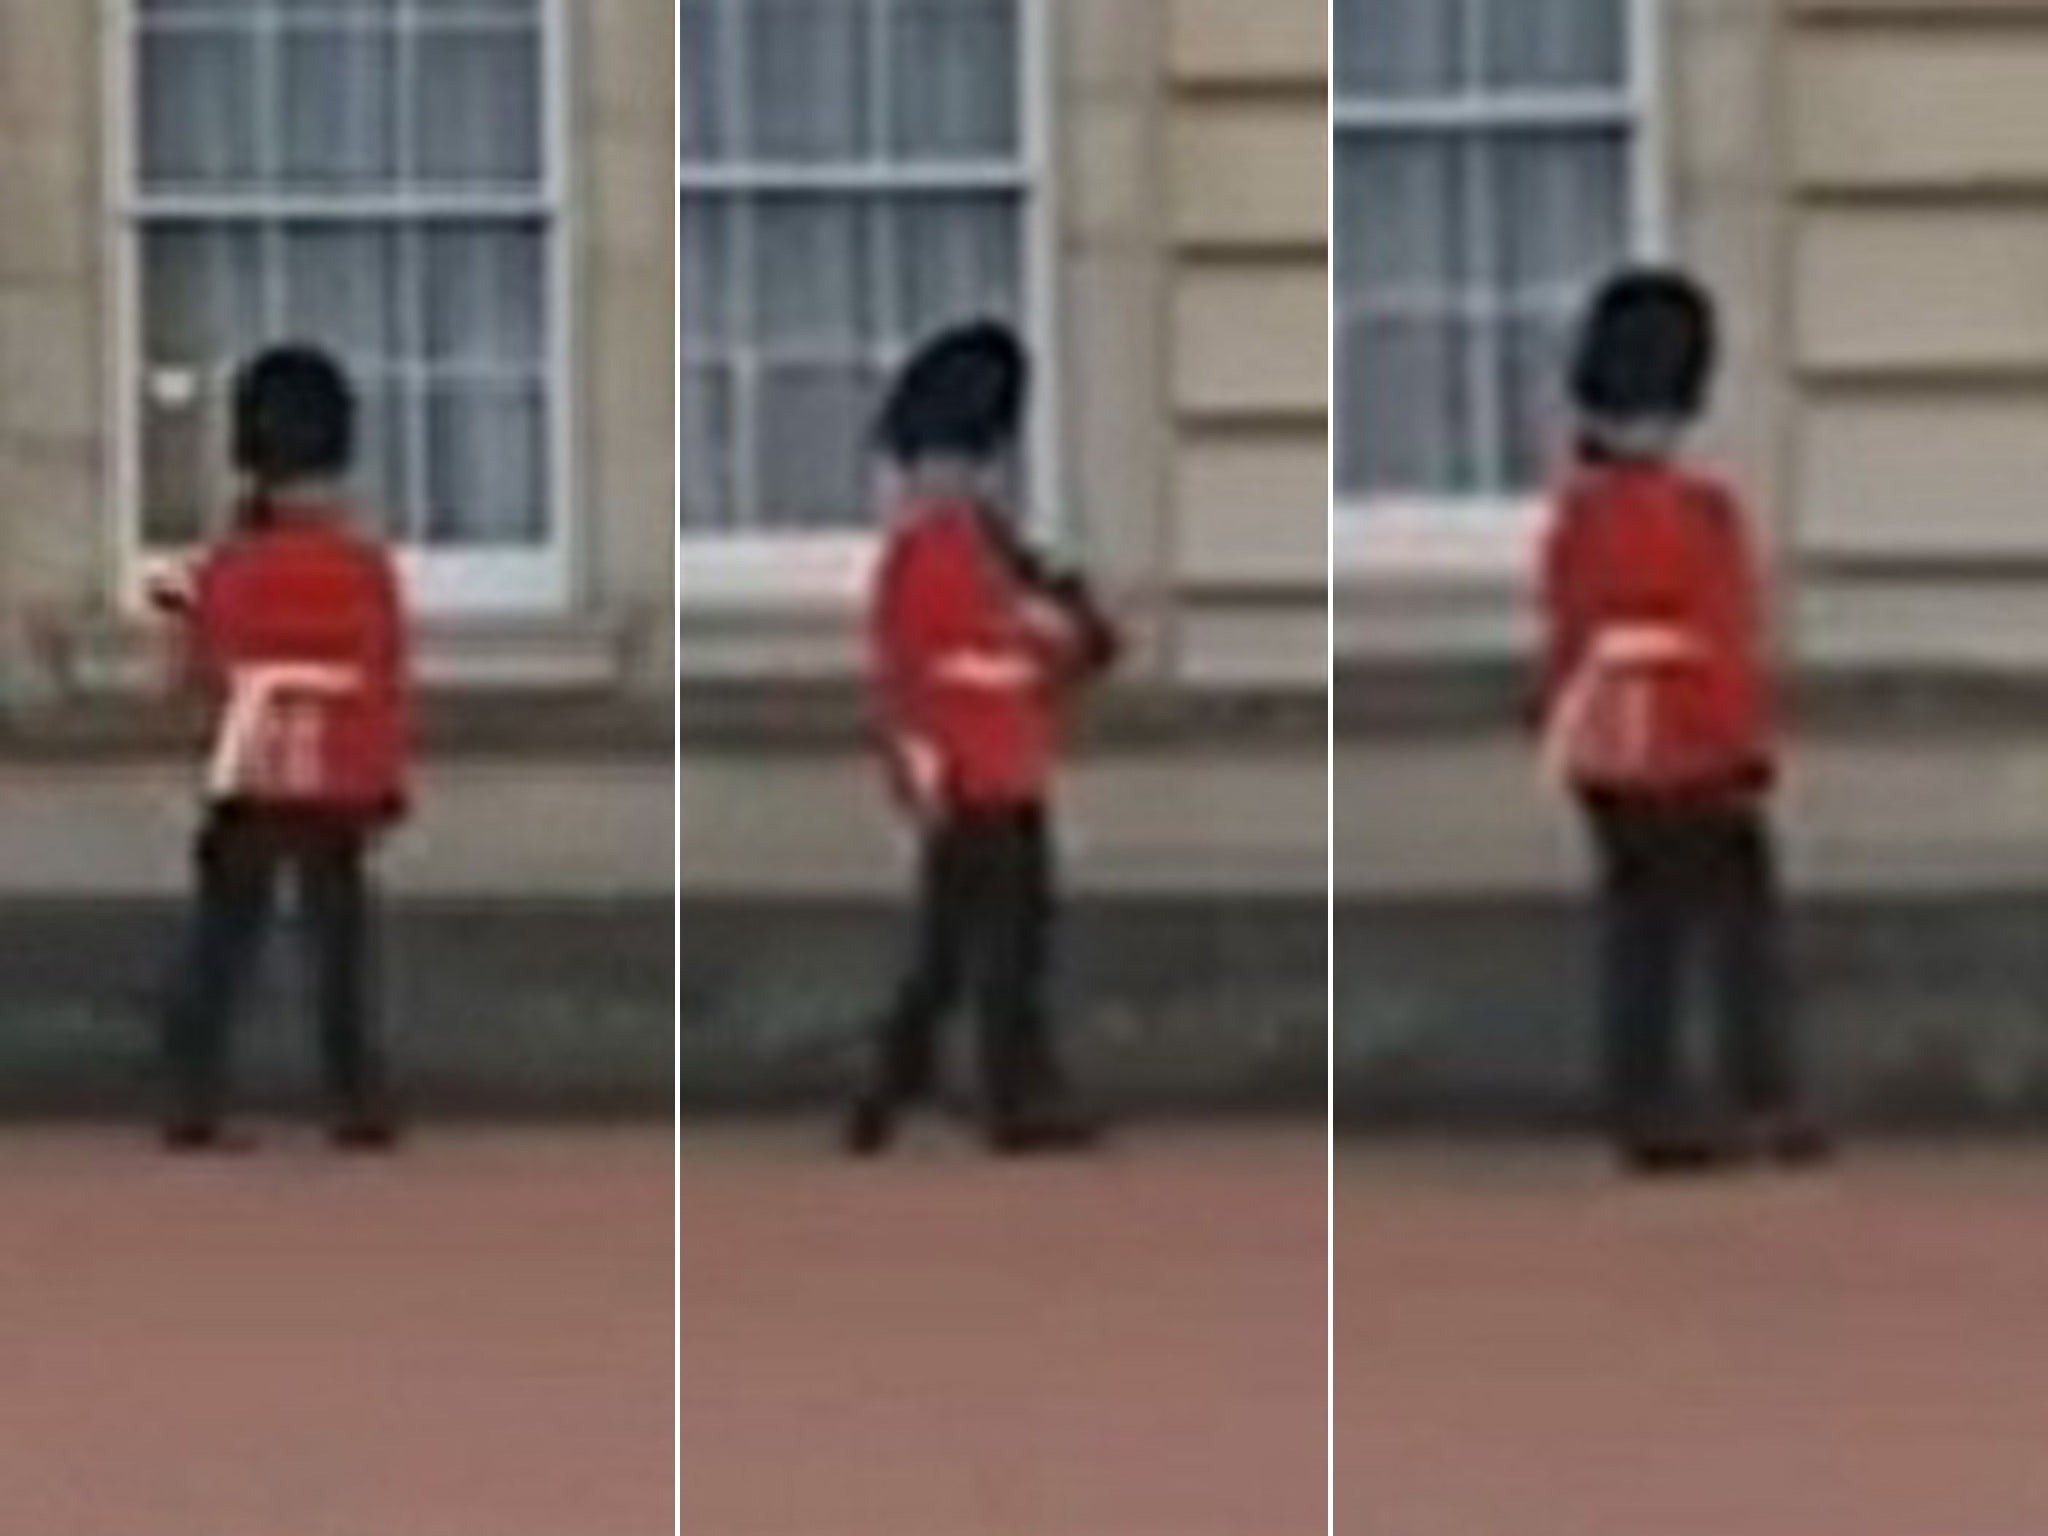 For one guardsman, the monotony of walking back and forth outside the Queen's London residence got just too much.